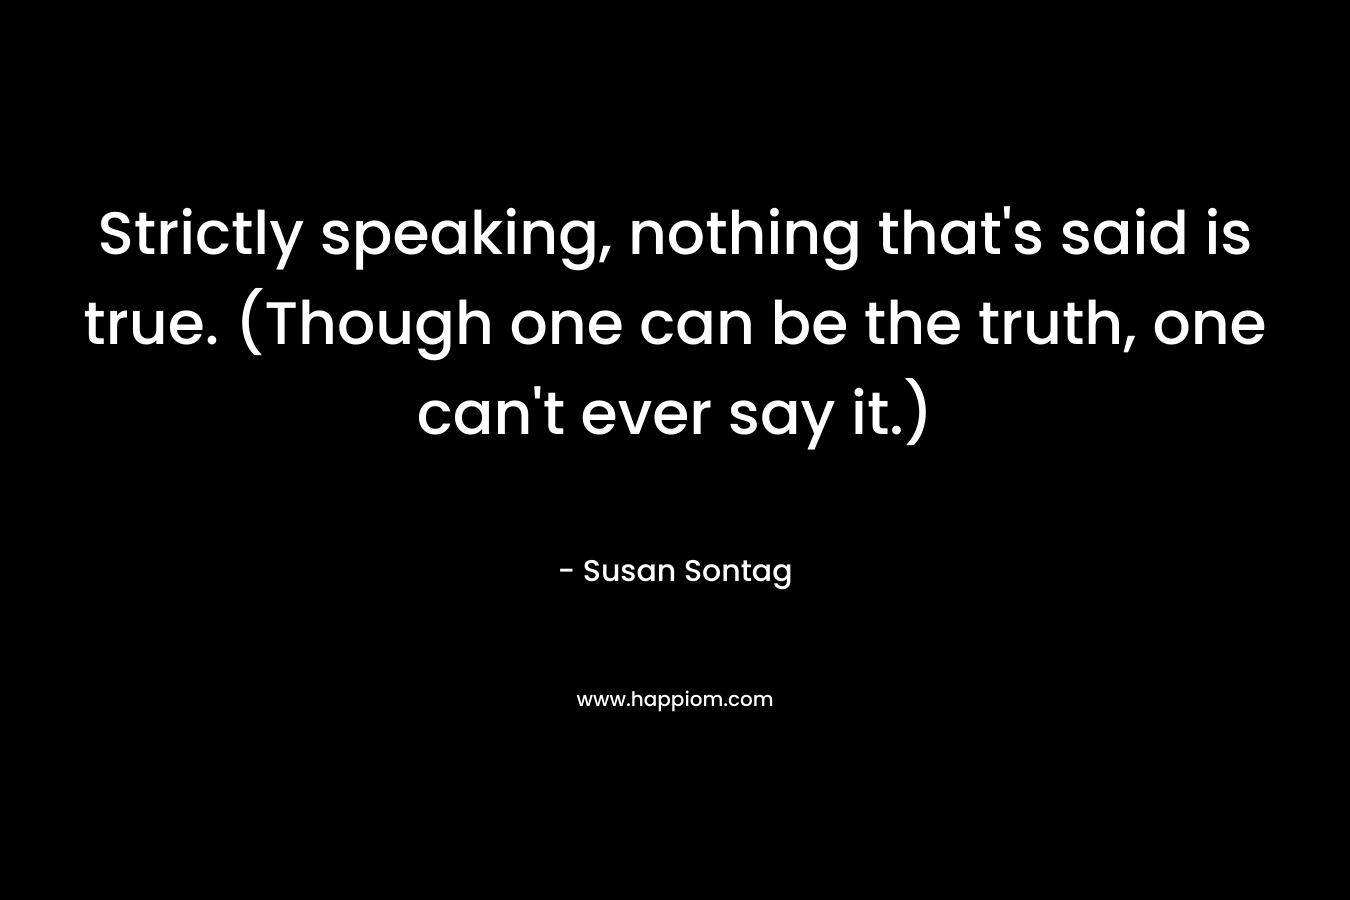 Strictly speaking, nothing that’s said is true. (Though one can be the truth, one can’t ever say it.) – Susan Sontag